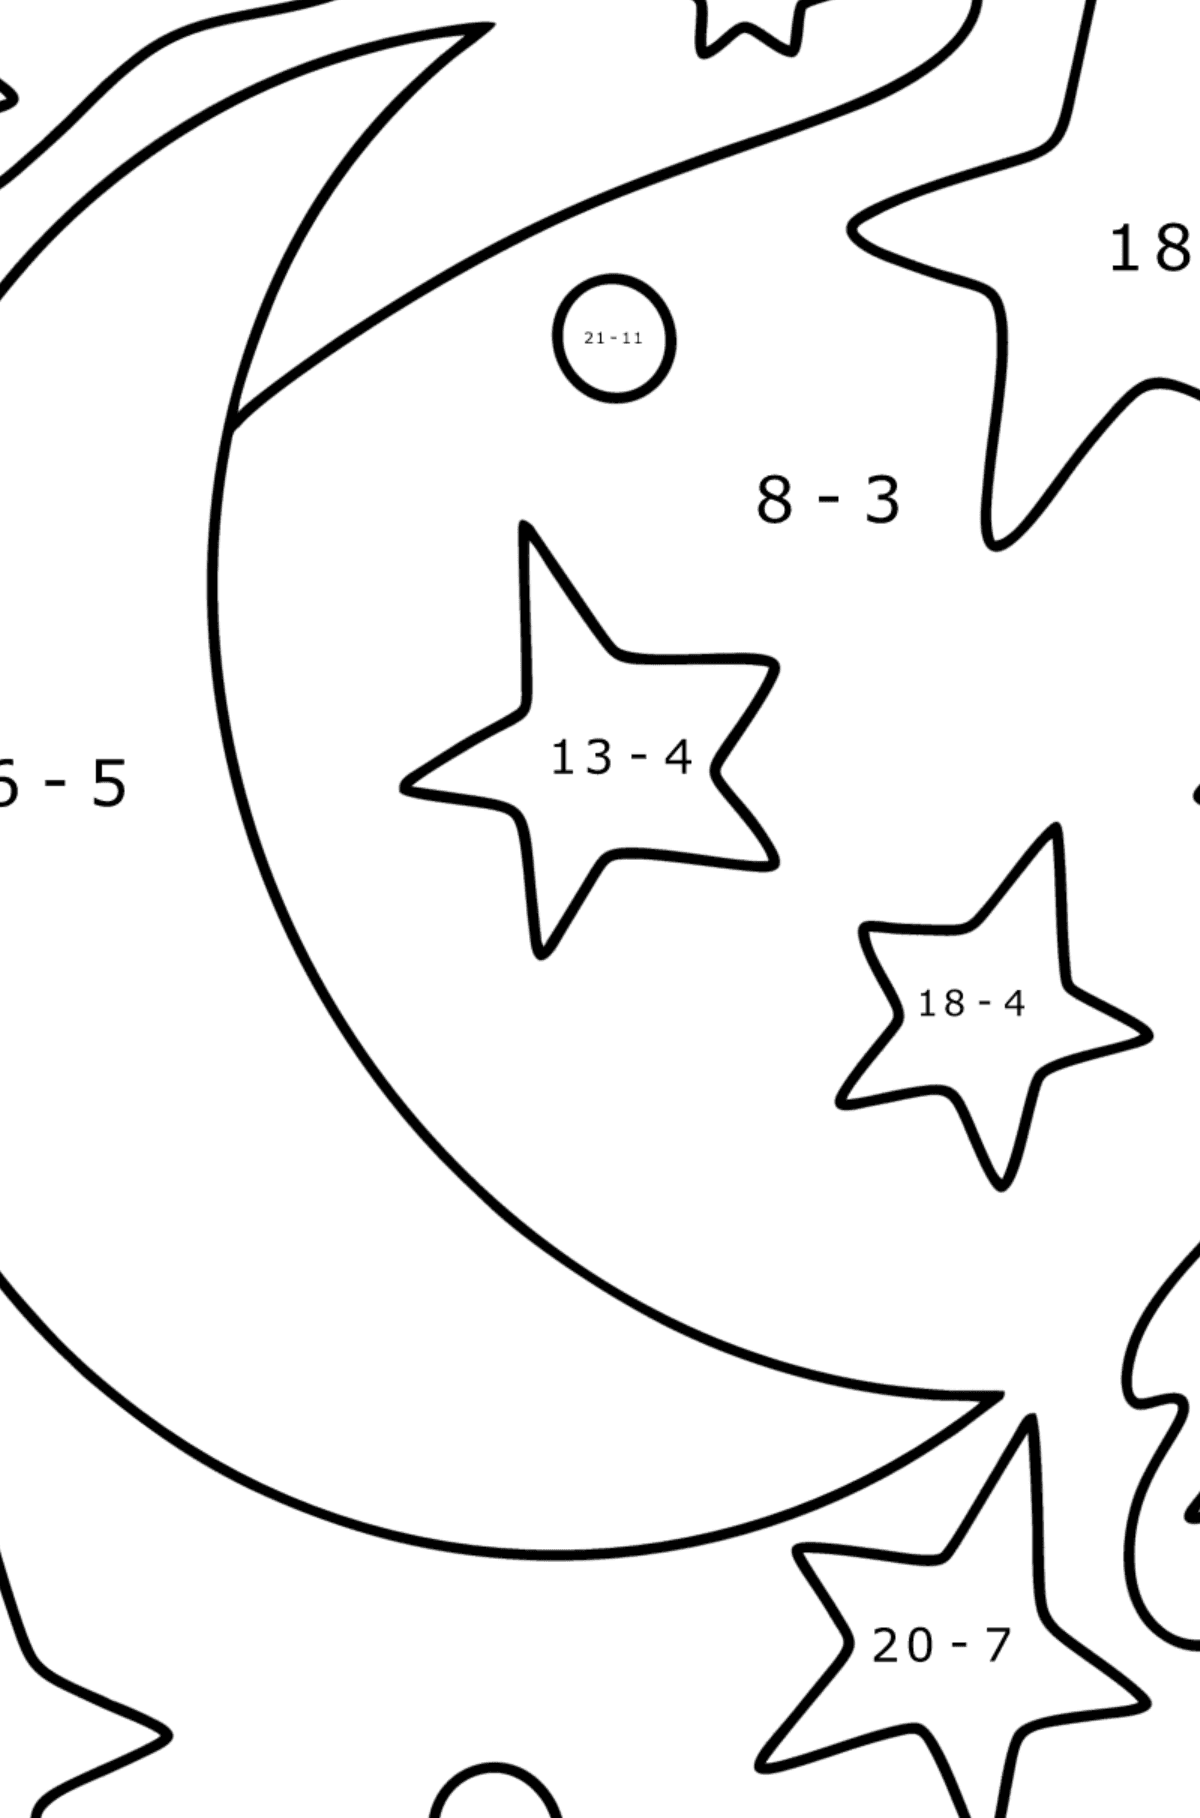 Coloring page moon and stars - Math Coloring - Subtraction for Kids